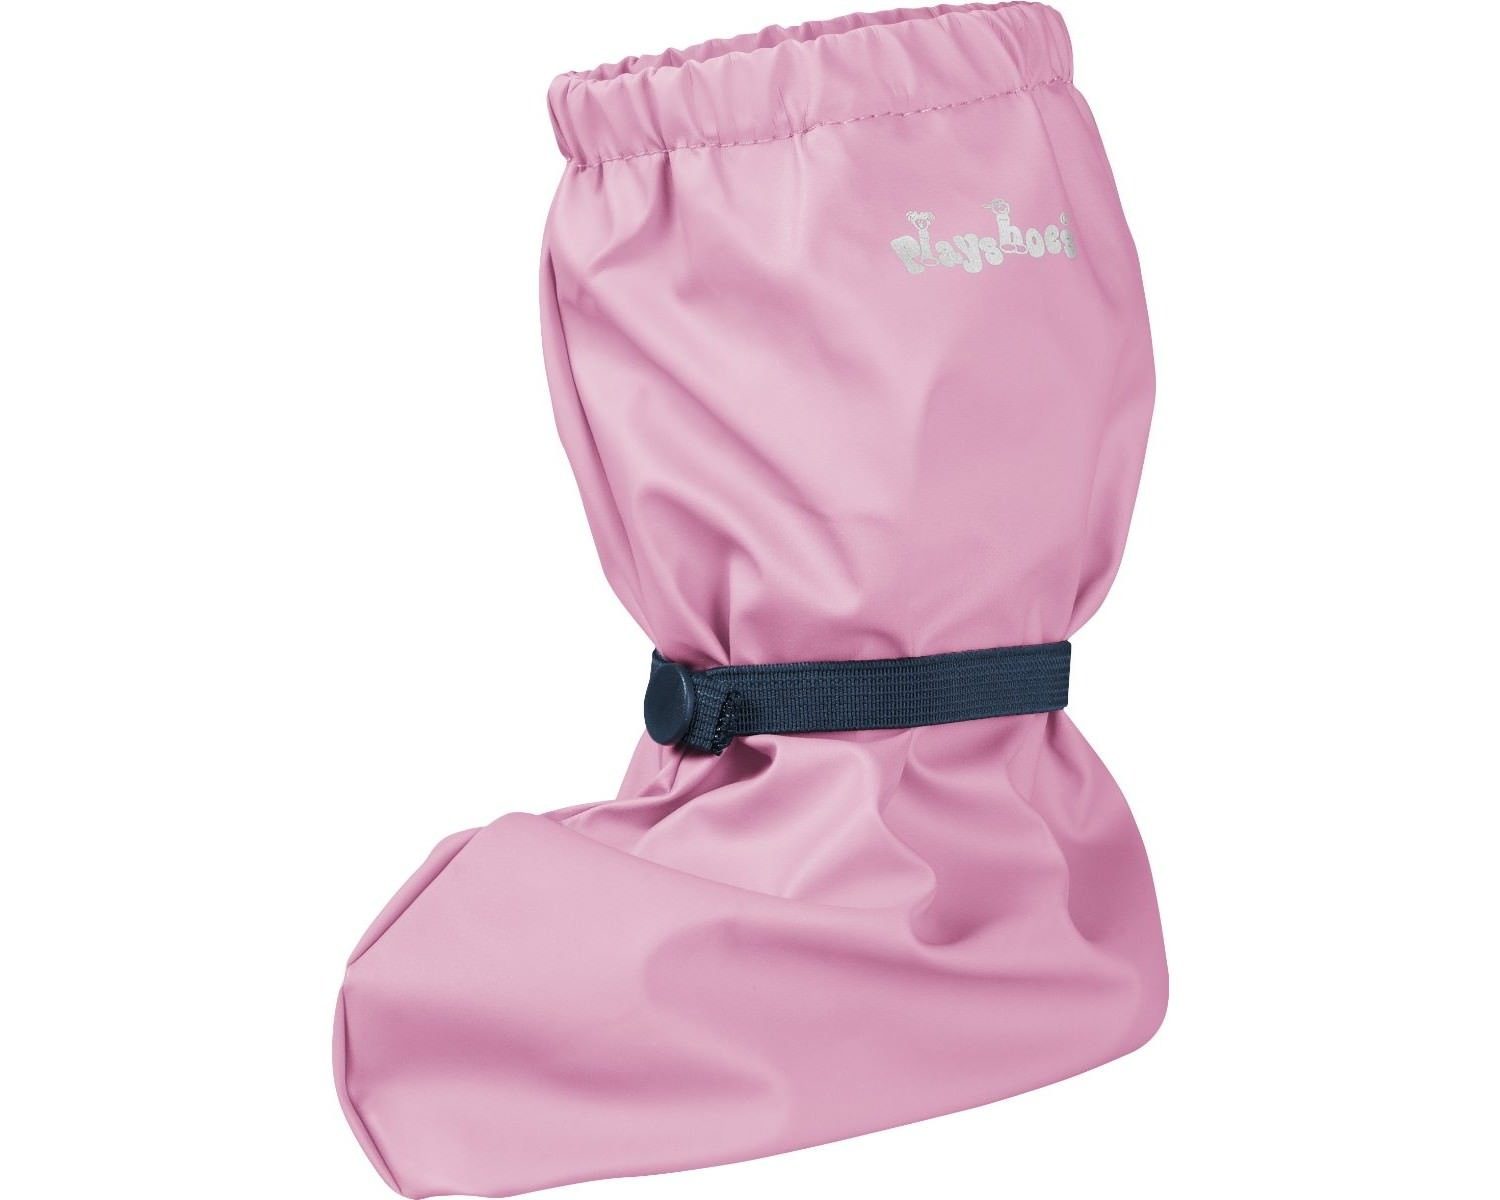 PLAYSHOES - Muffole doublé Taille 1 PLAYSHOES